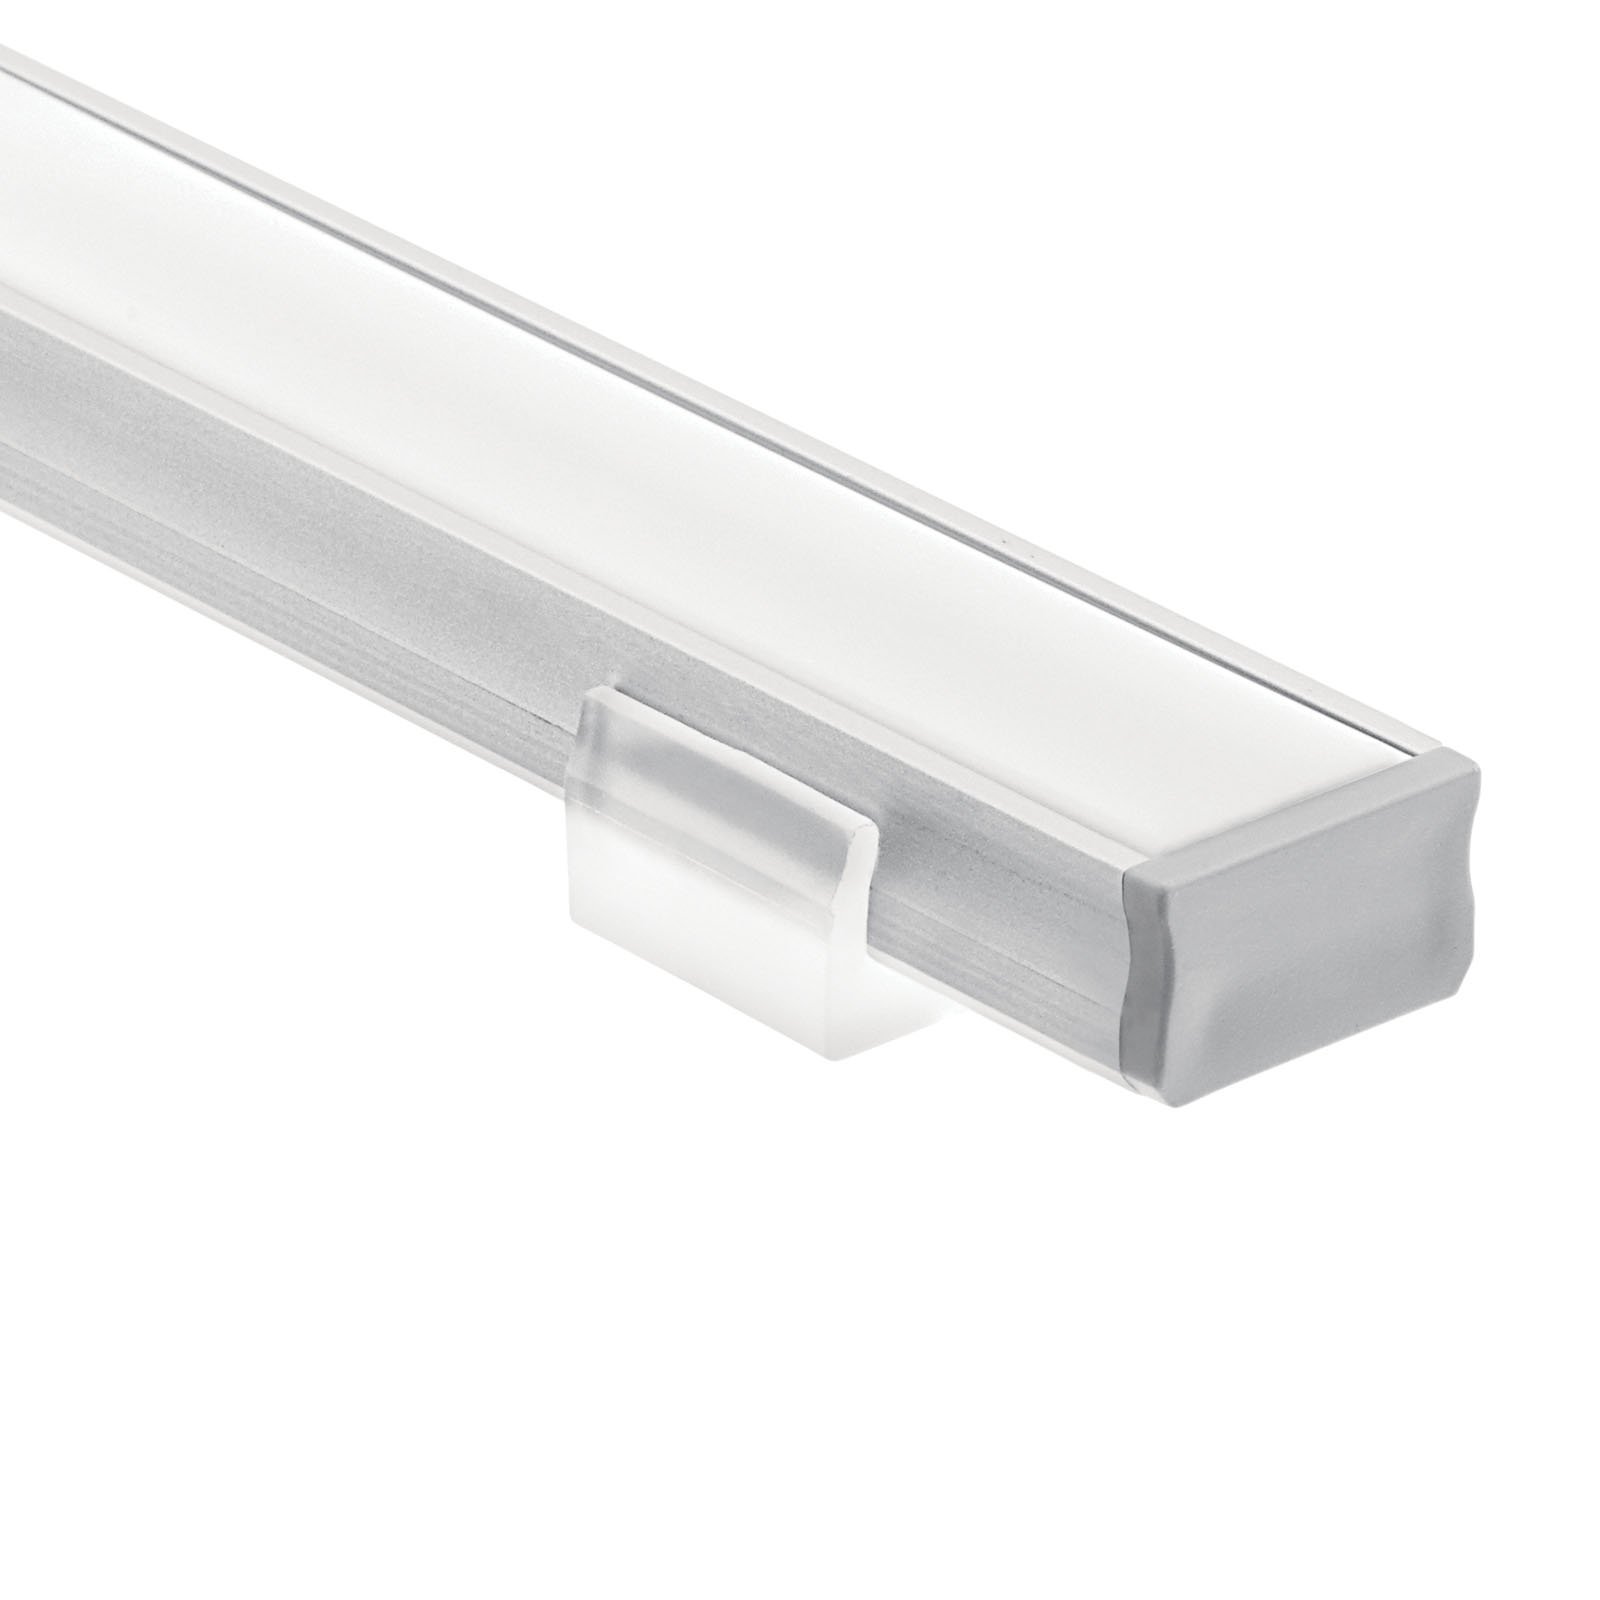 Mount LED tape light to surfaces like shelves and cabinets with the TE Standard  Series aluminum extruded channel kit. The kit comes equipped with 4 feet of channel and white opaque lens, as well as coordinating end caps and mounting clips. The standard depth of the channel offers a light distribution that is gently diffused. Simply add the Kichler LED Tape, Power Supply and accessories best suited for your installation.